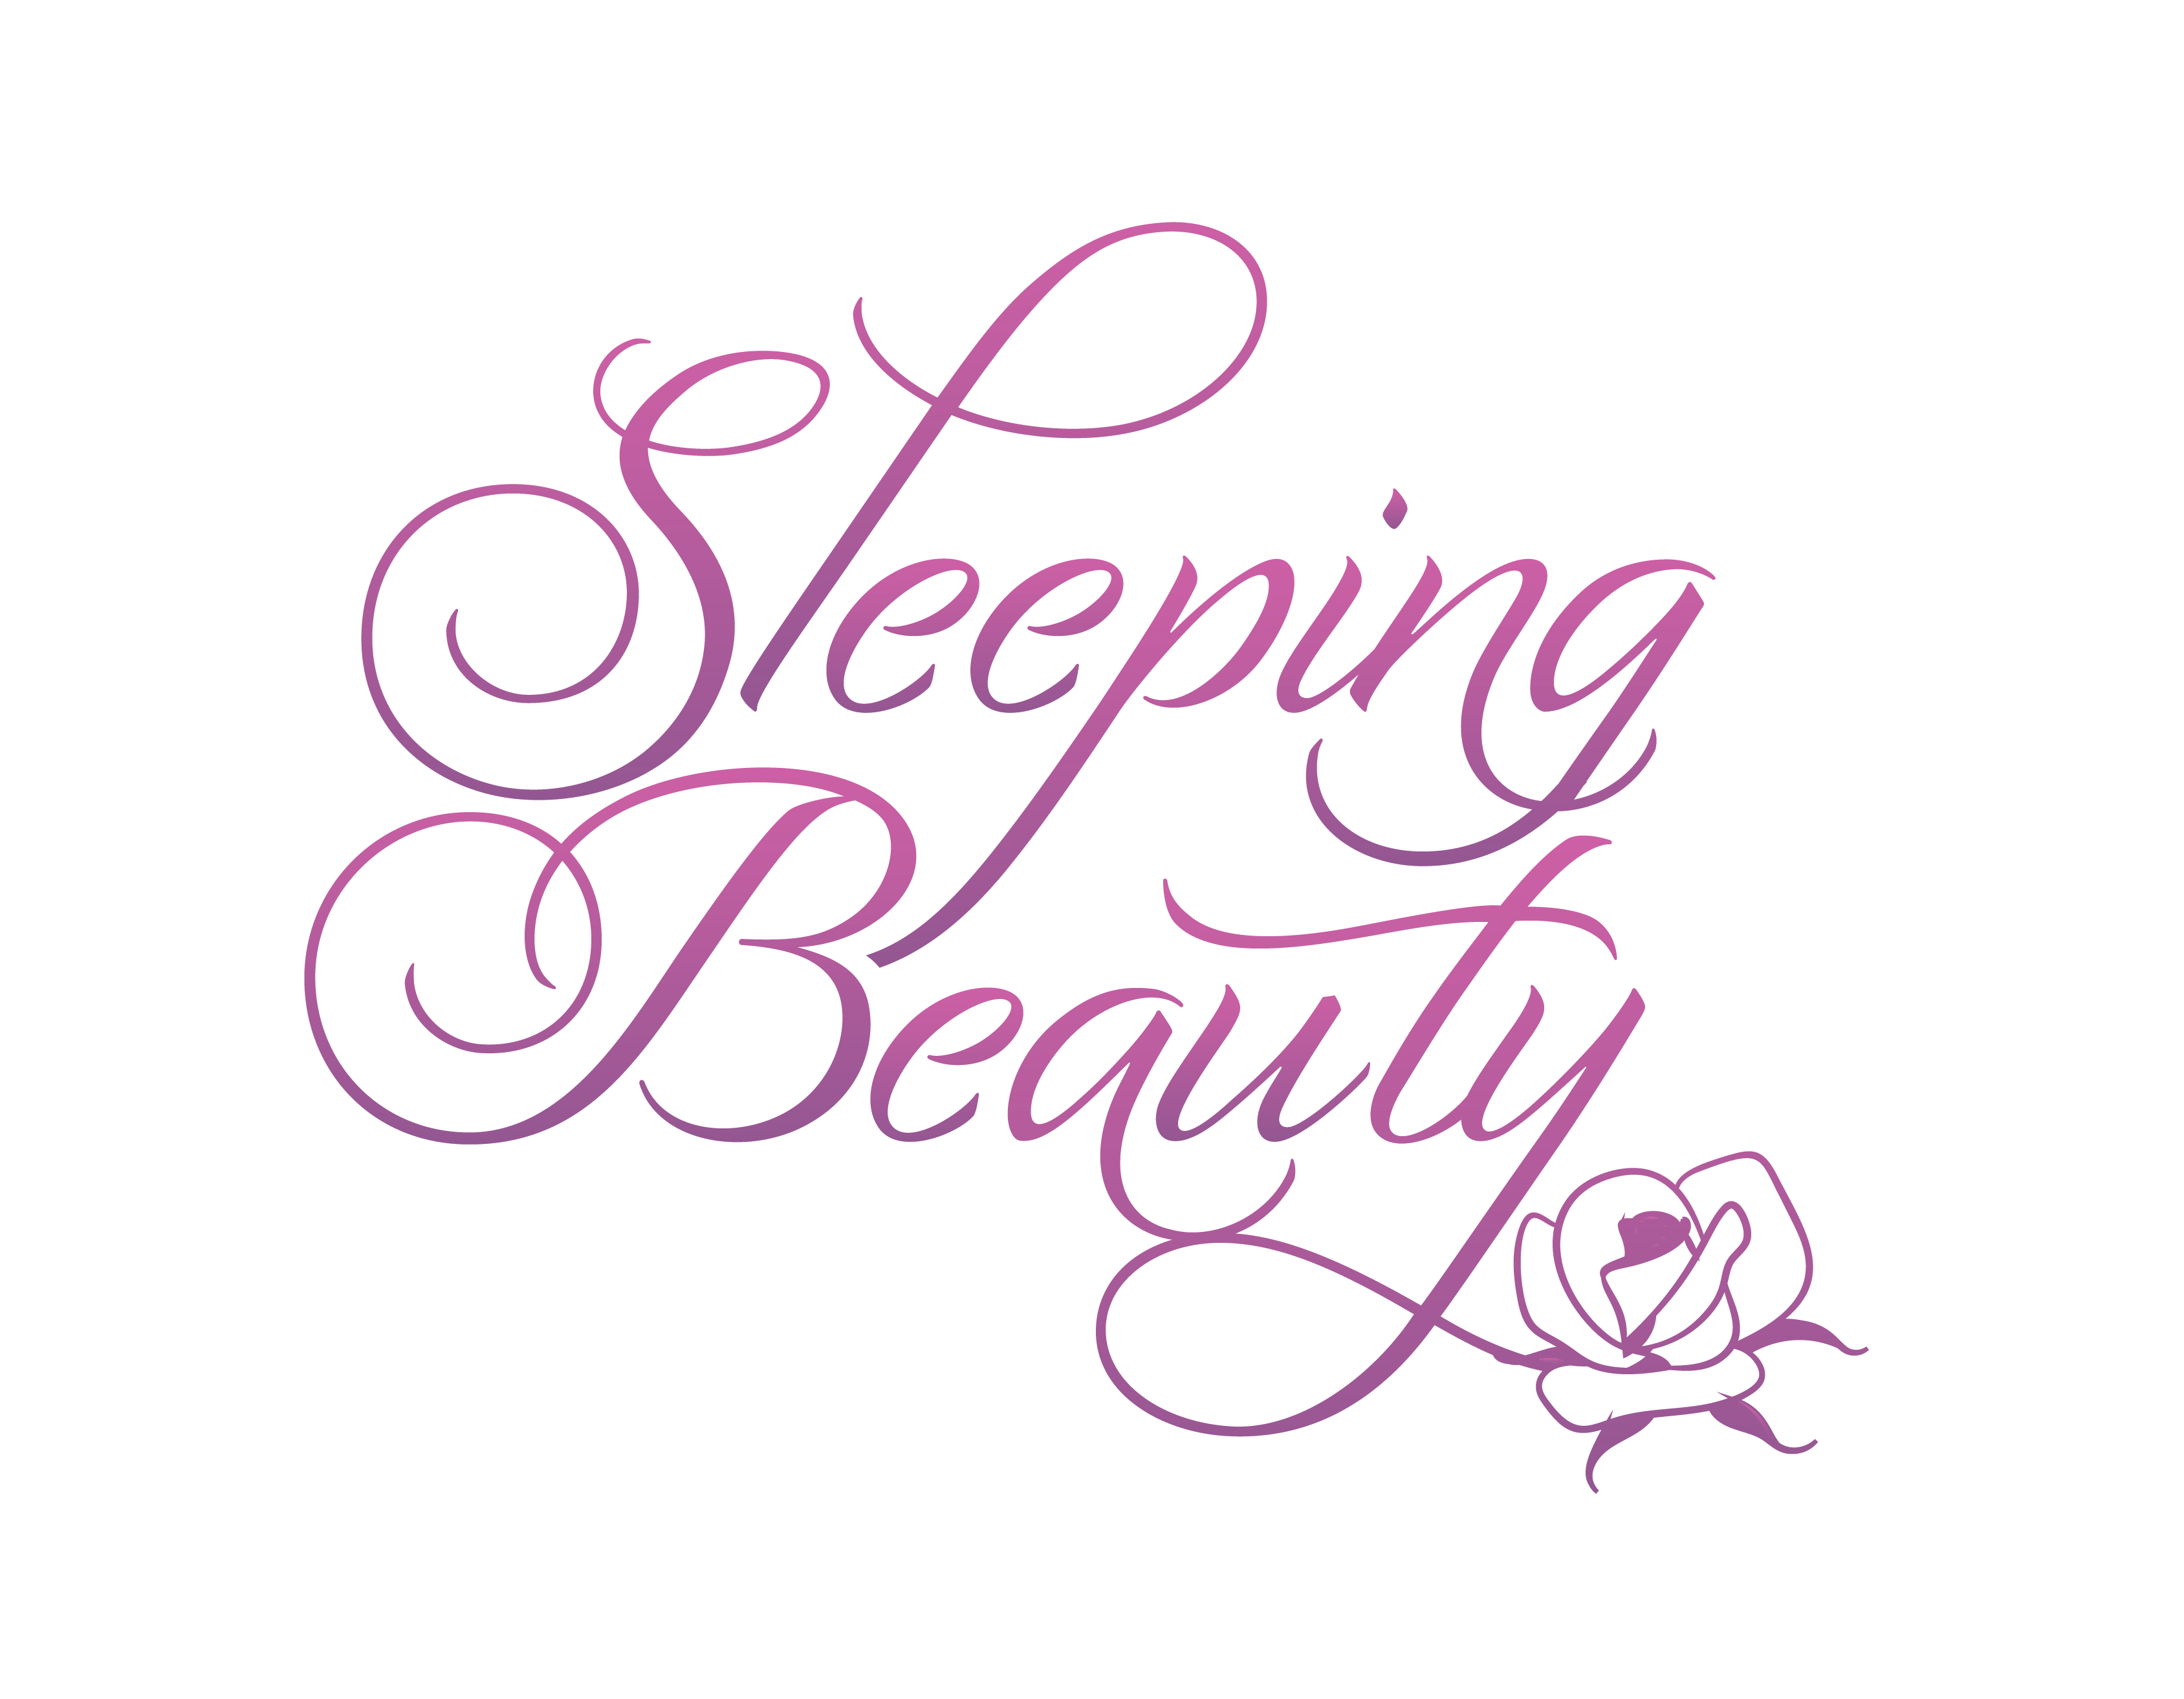 Sleeping Beauty Ballet on March 24-25. East County Ballet Conservatory is a classical training program in East County San Diego, located in Santee at Expressions Dance & Movement Center. Training intermediate and advanced dancers in pre-pointe, pointe, and classical ballet variations.